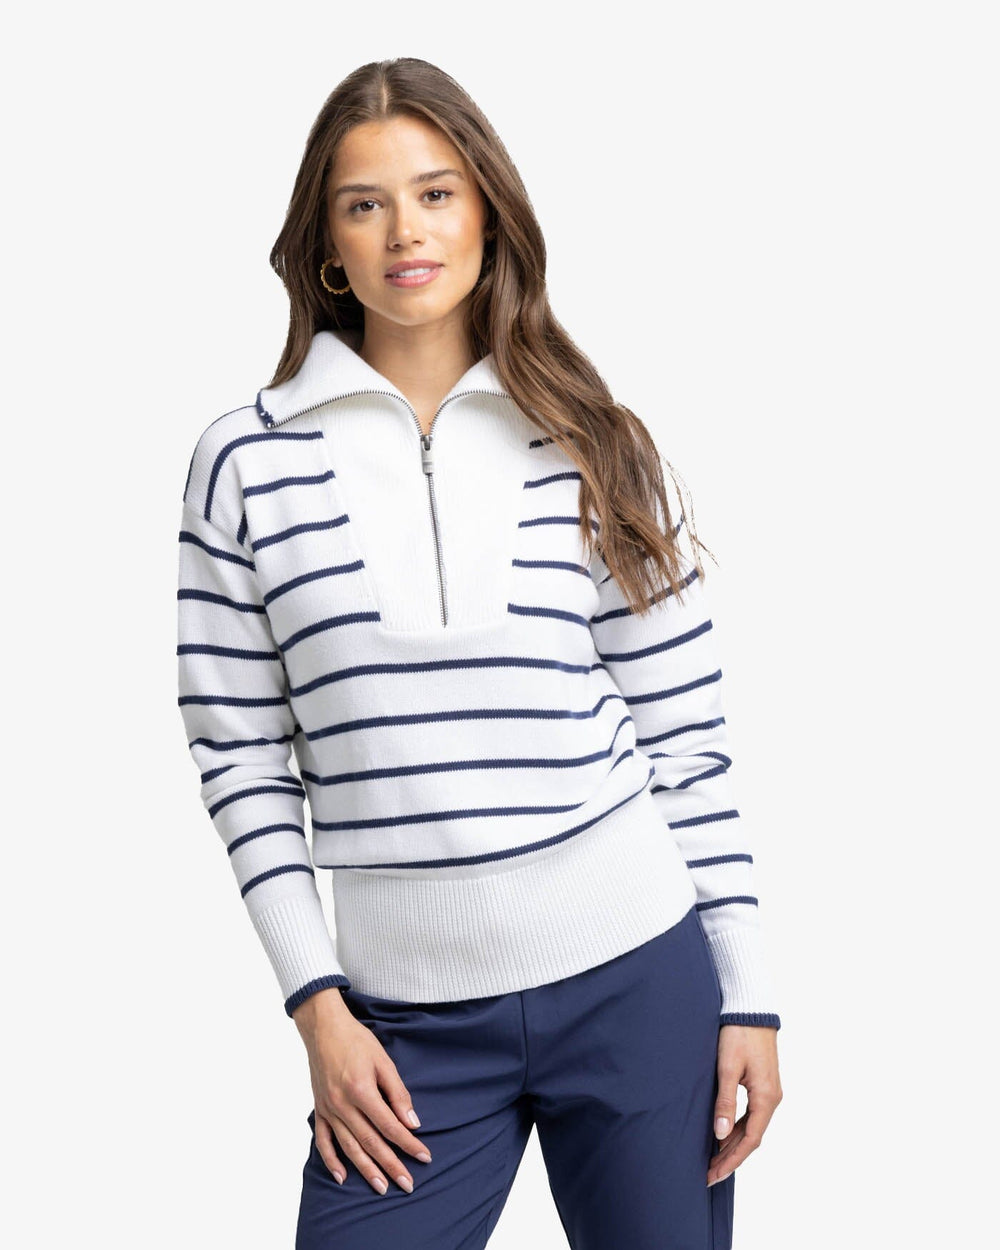 The front view of the Southern Tide Maizy Sweater by Southern Tide - Nautical Navy